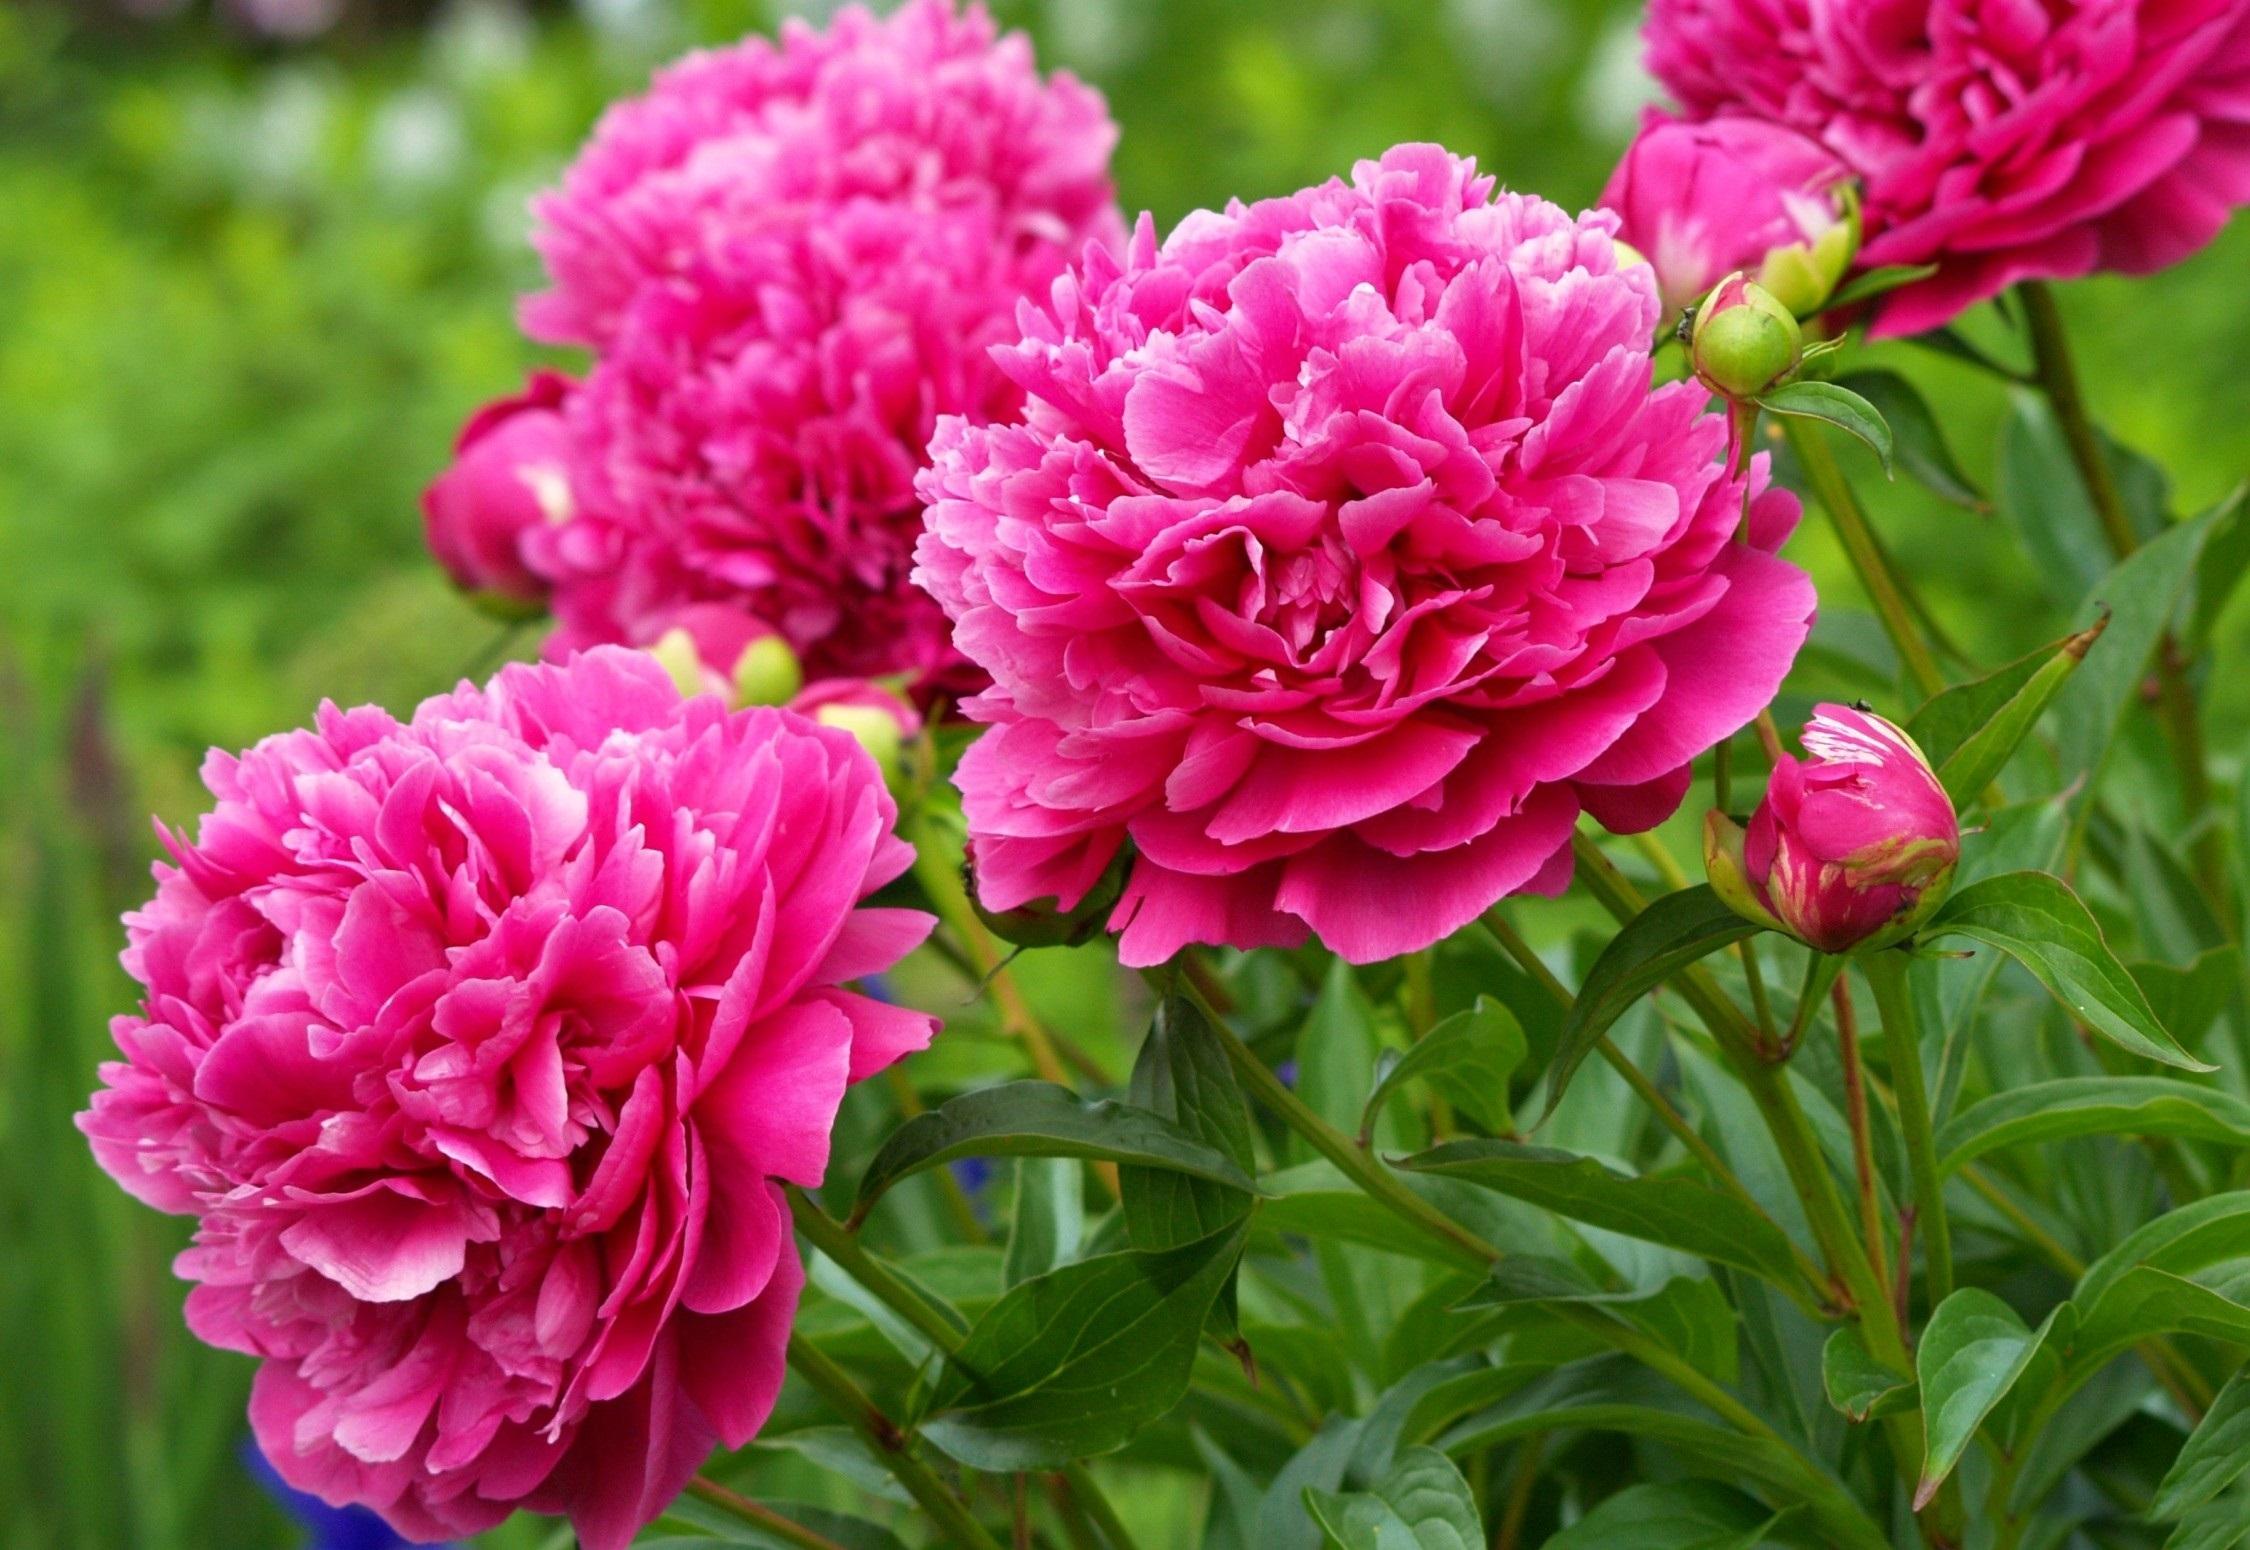 Pink Peonies High Quality And Resolution Wallpaper On